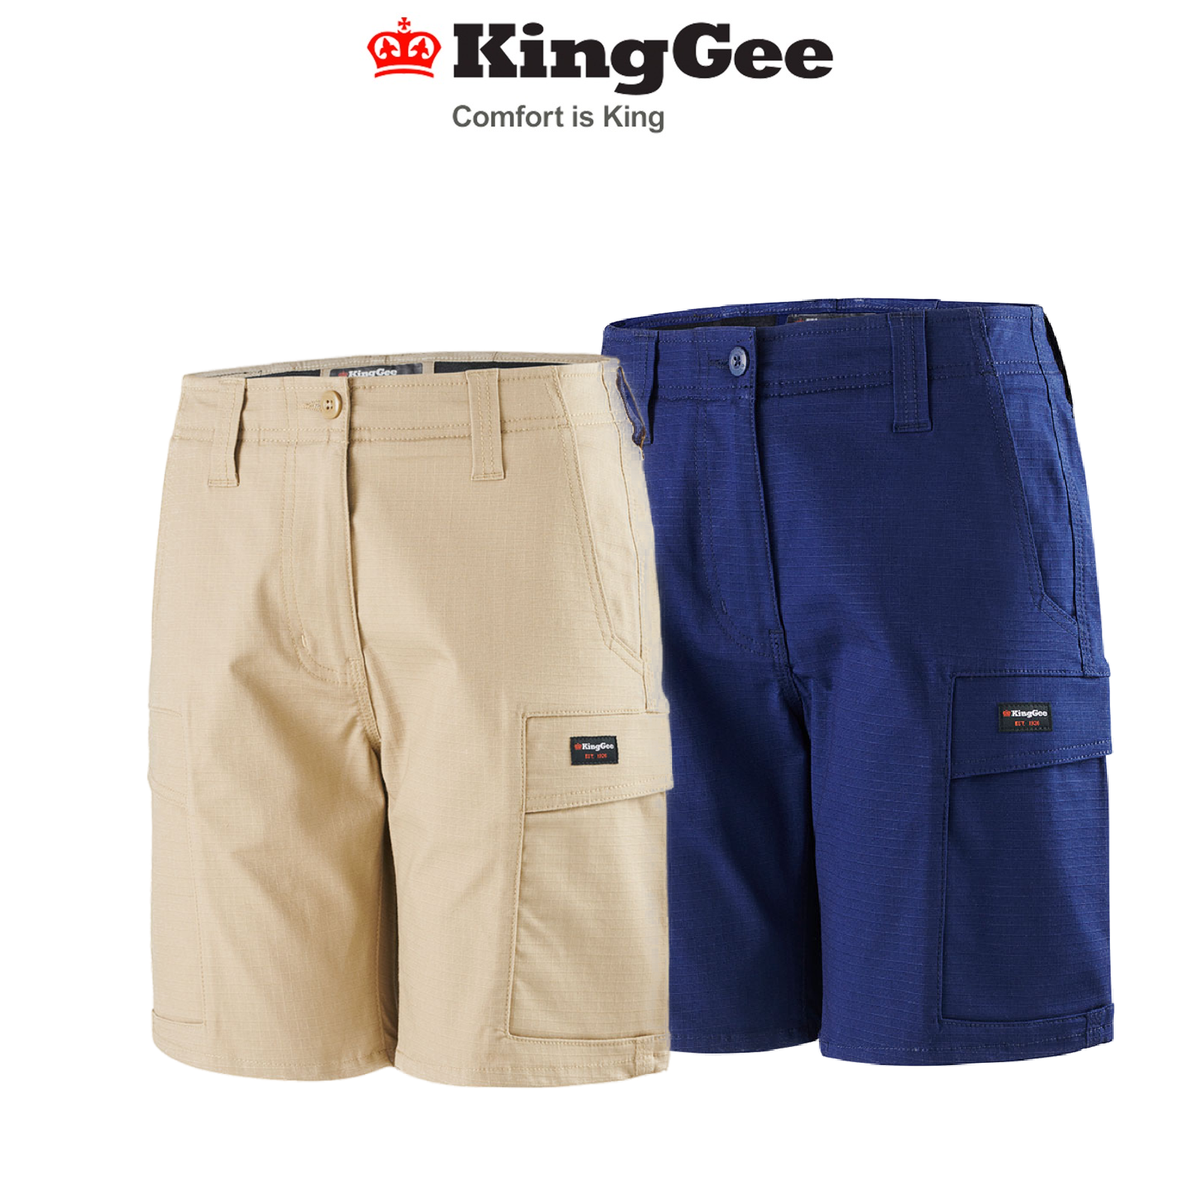 KingGee Womens Workcool Pro Shorts Comfort Stretch Waistband Work Safety K47008